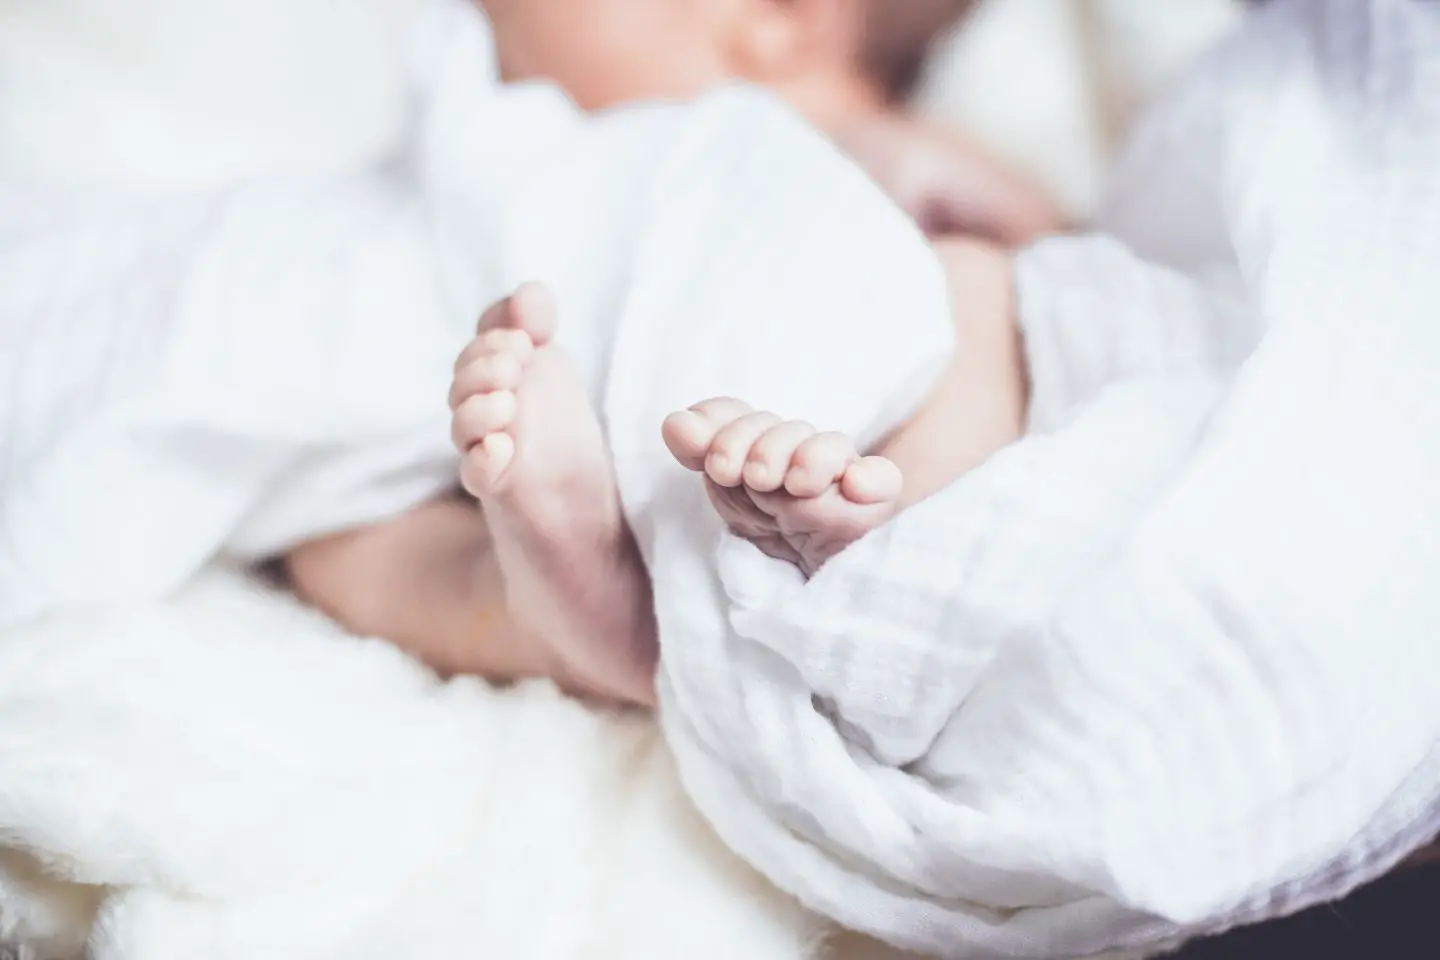 A newborn baby wrapped in a white blanket. The baby's feet are the focus of the photo